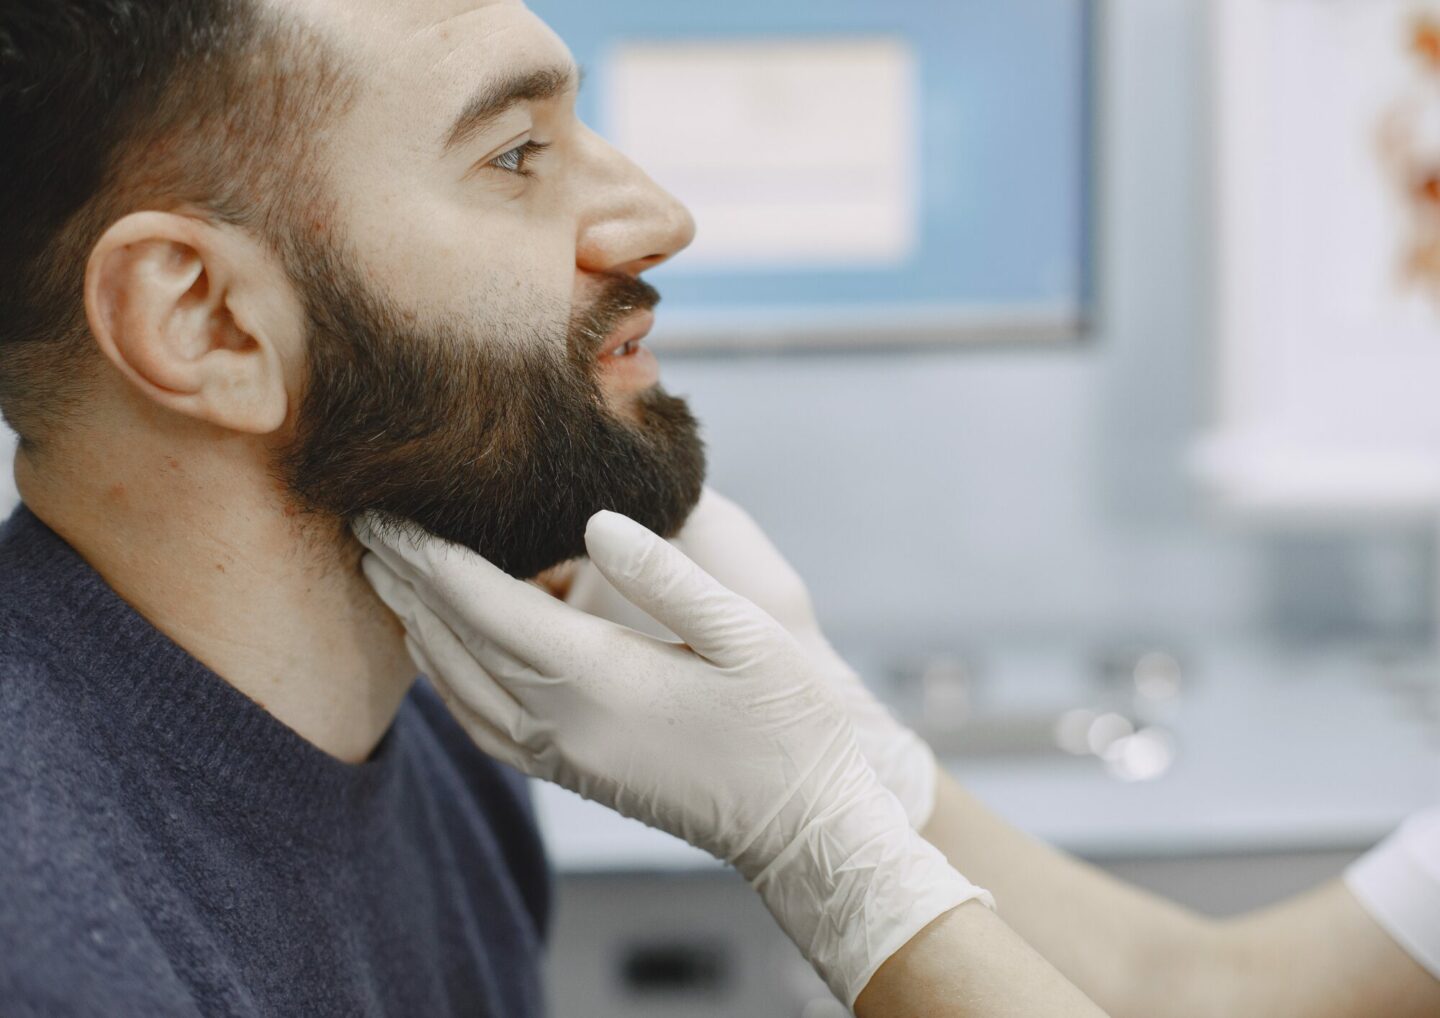 Male patient's neck being examined by healthcare professional.